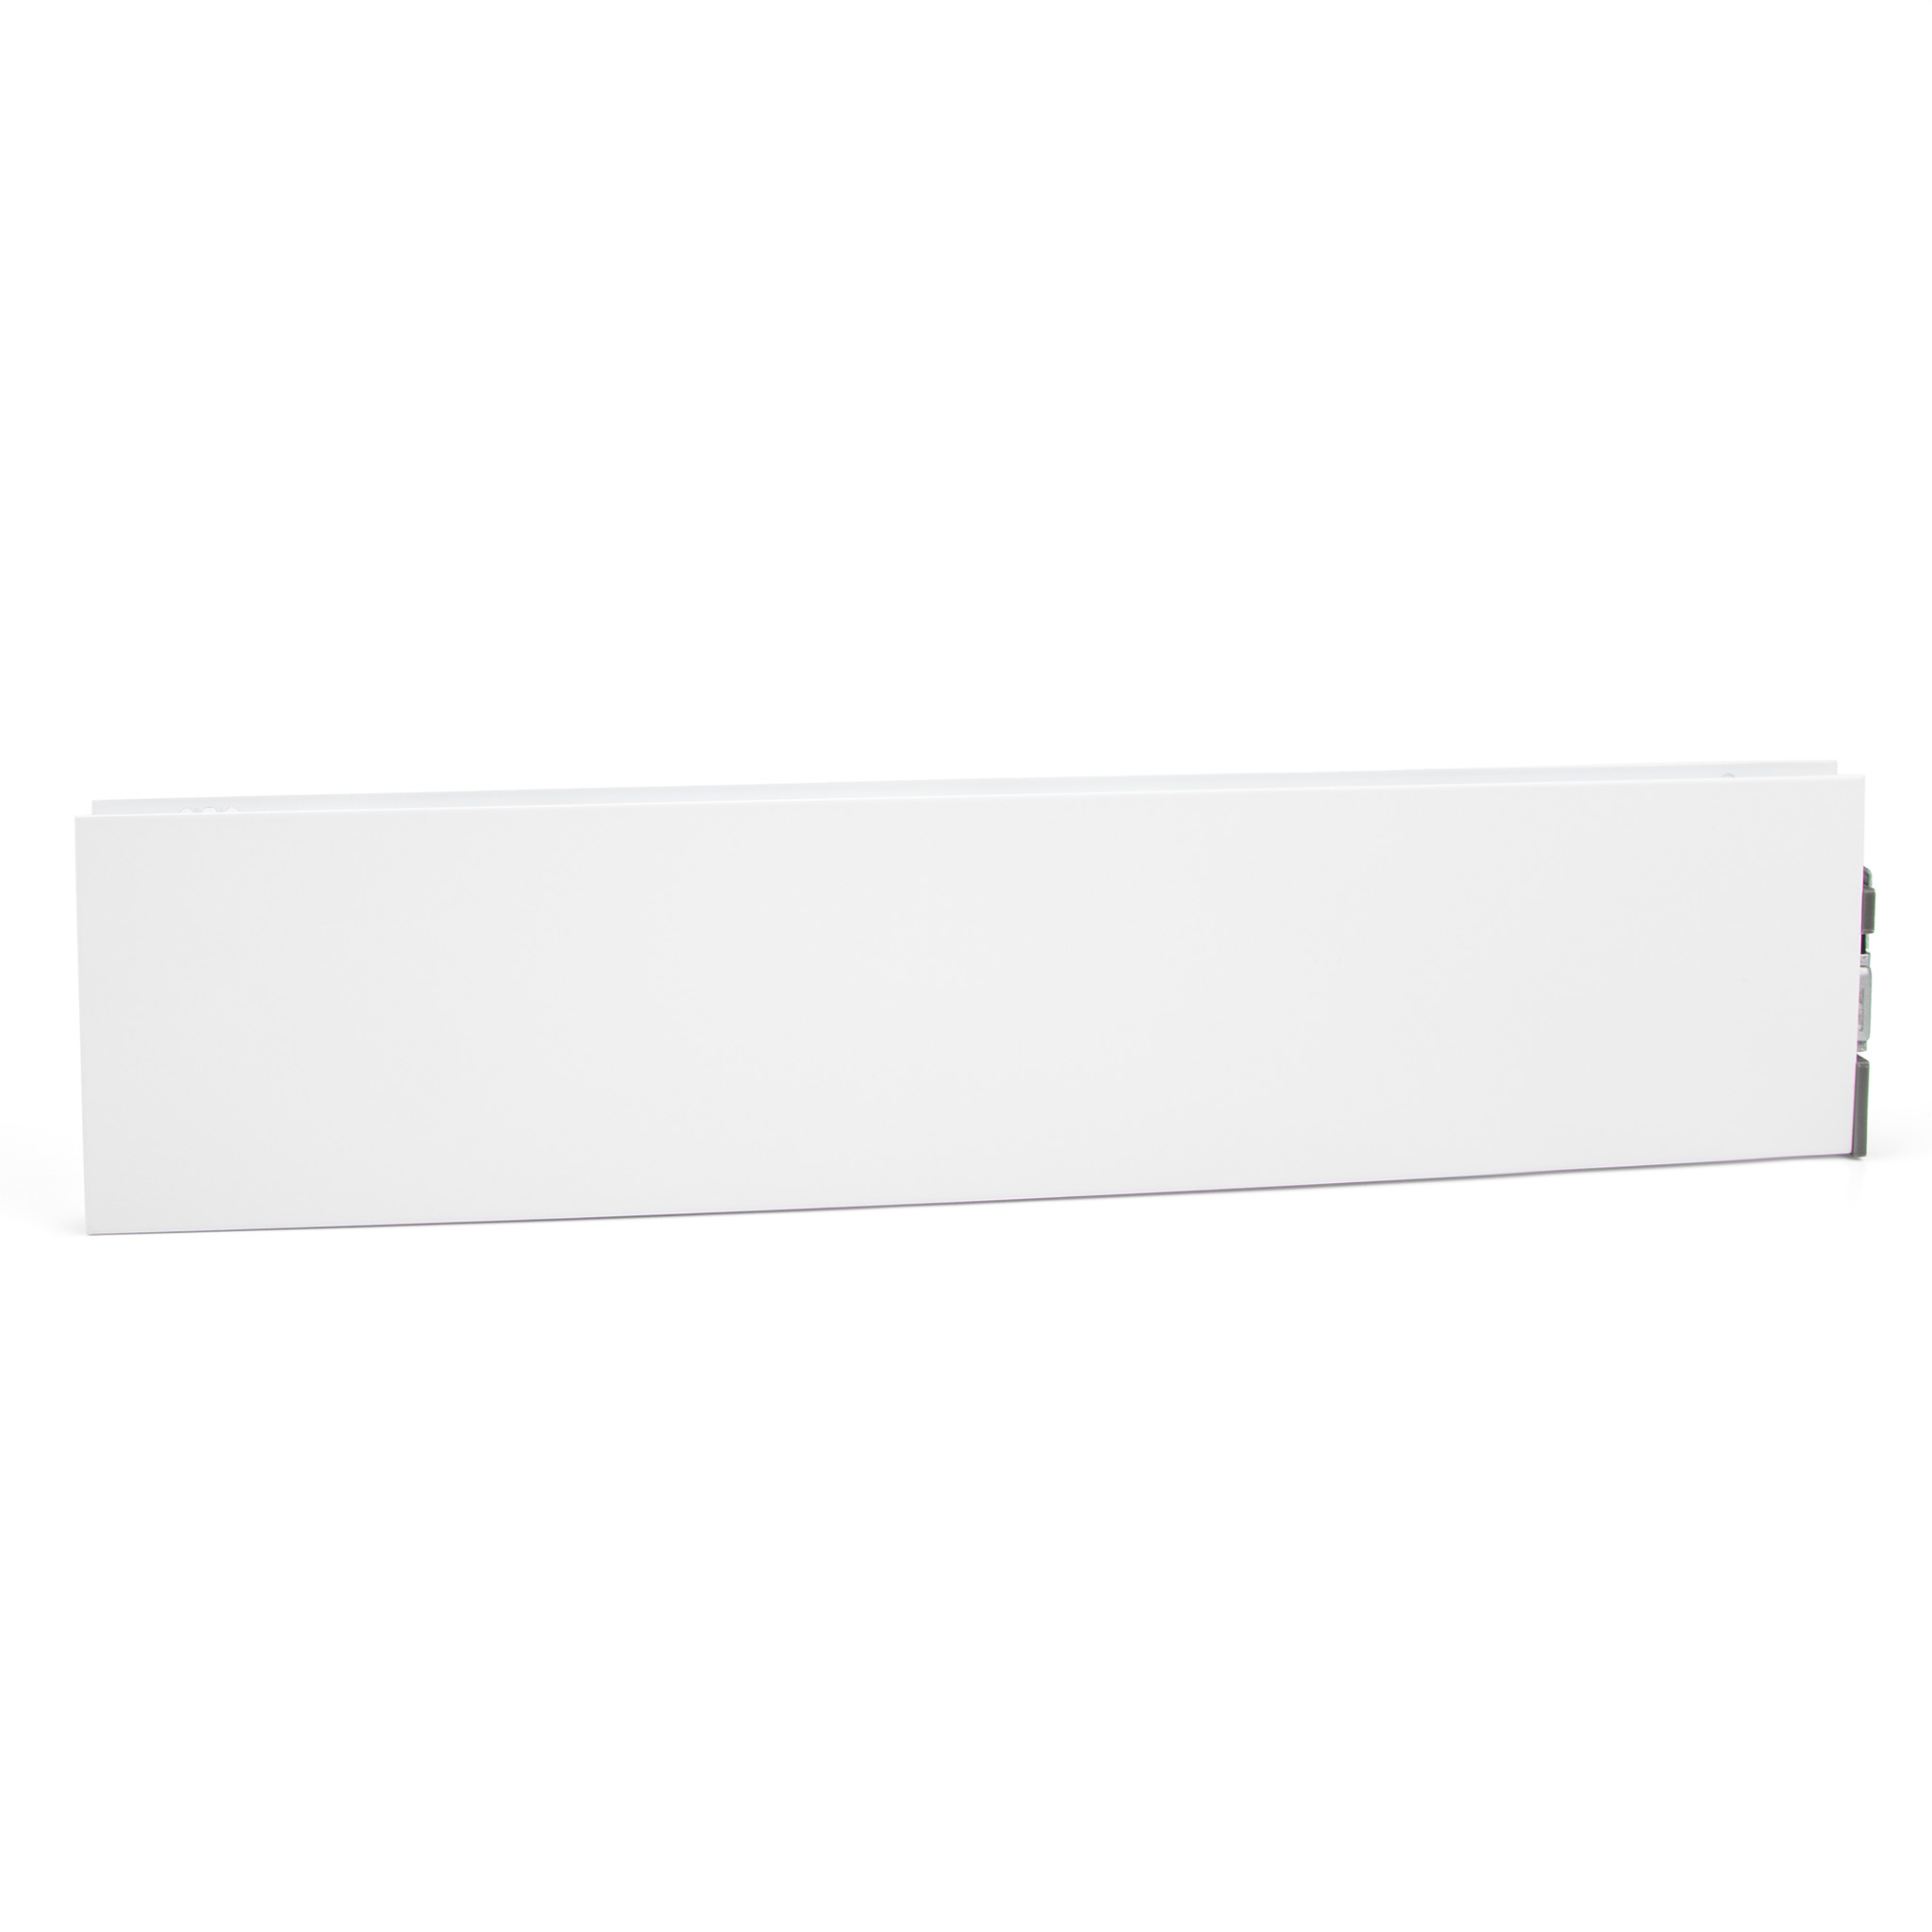 M-Series Fusion Side Wall, 270mm Length, 88mm Height, Lunar White